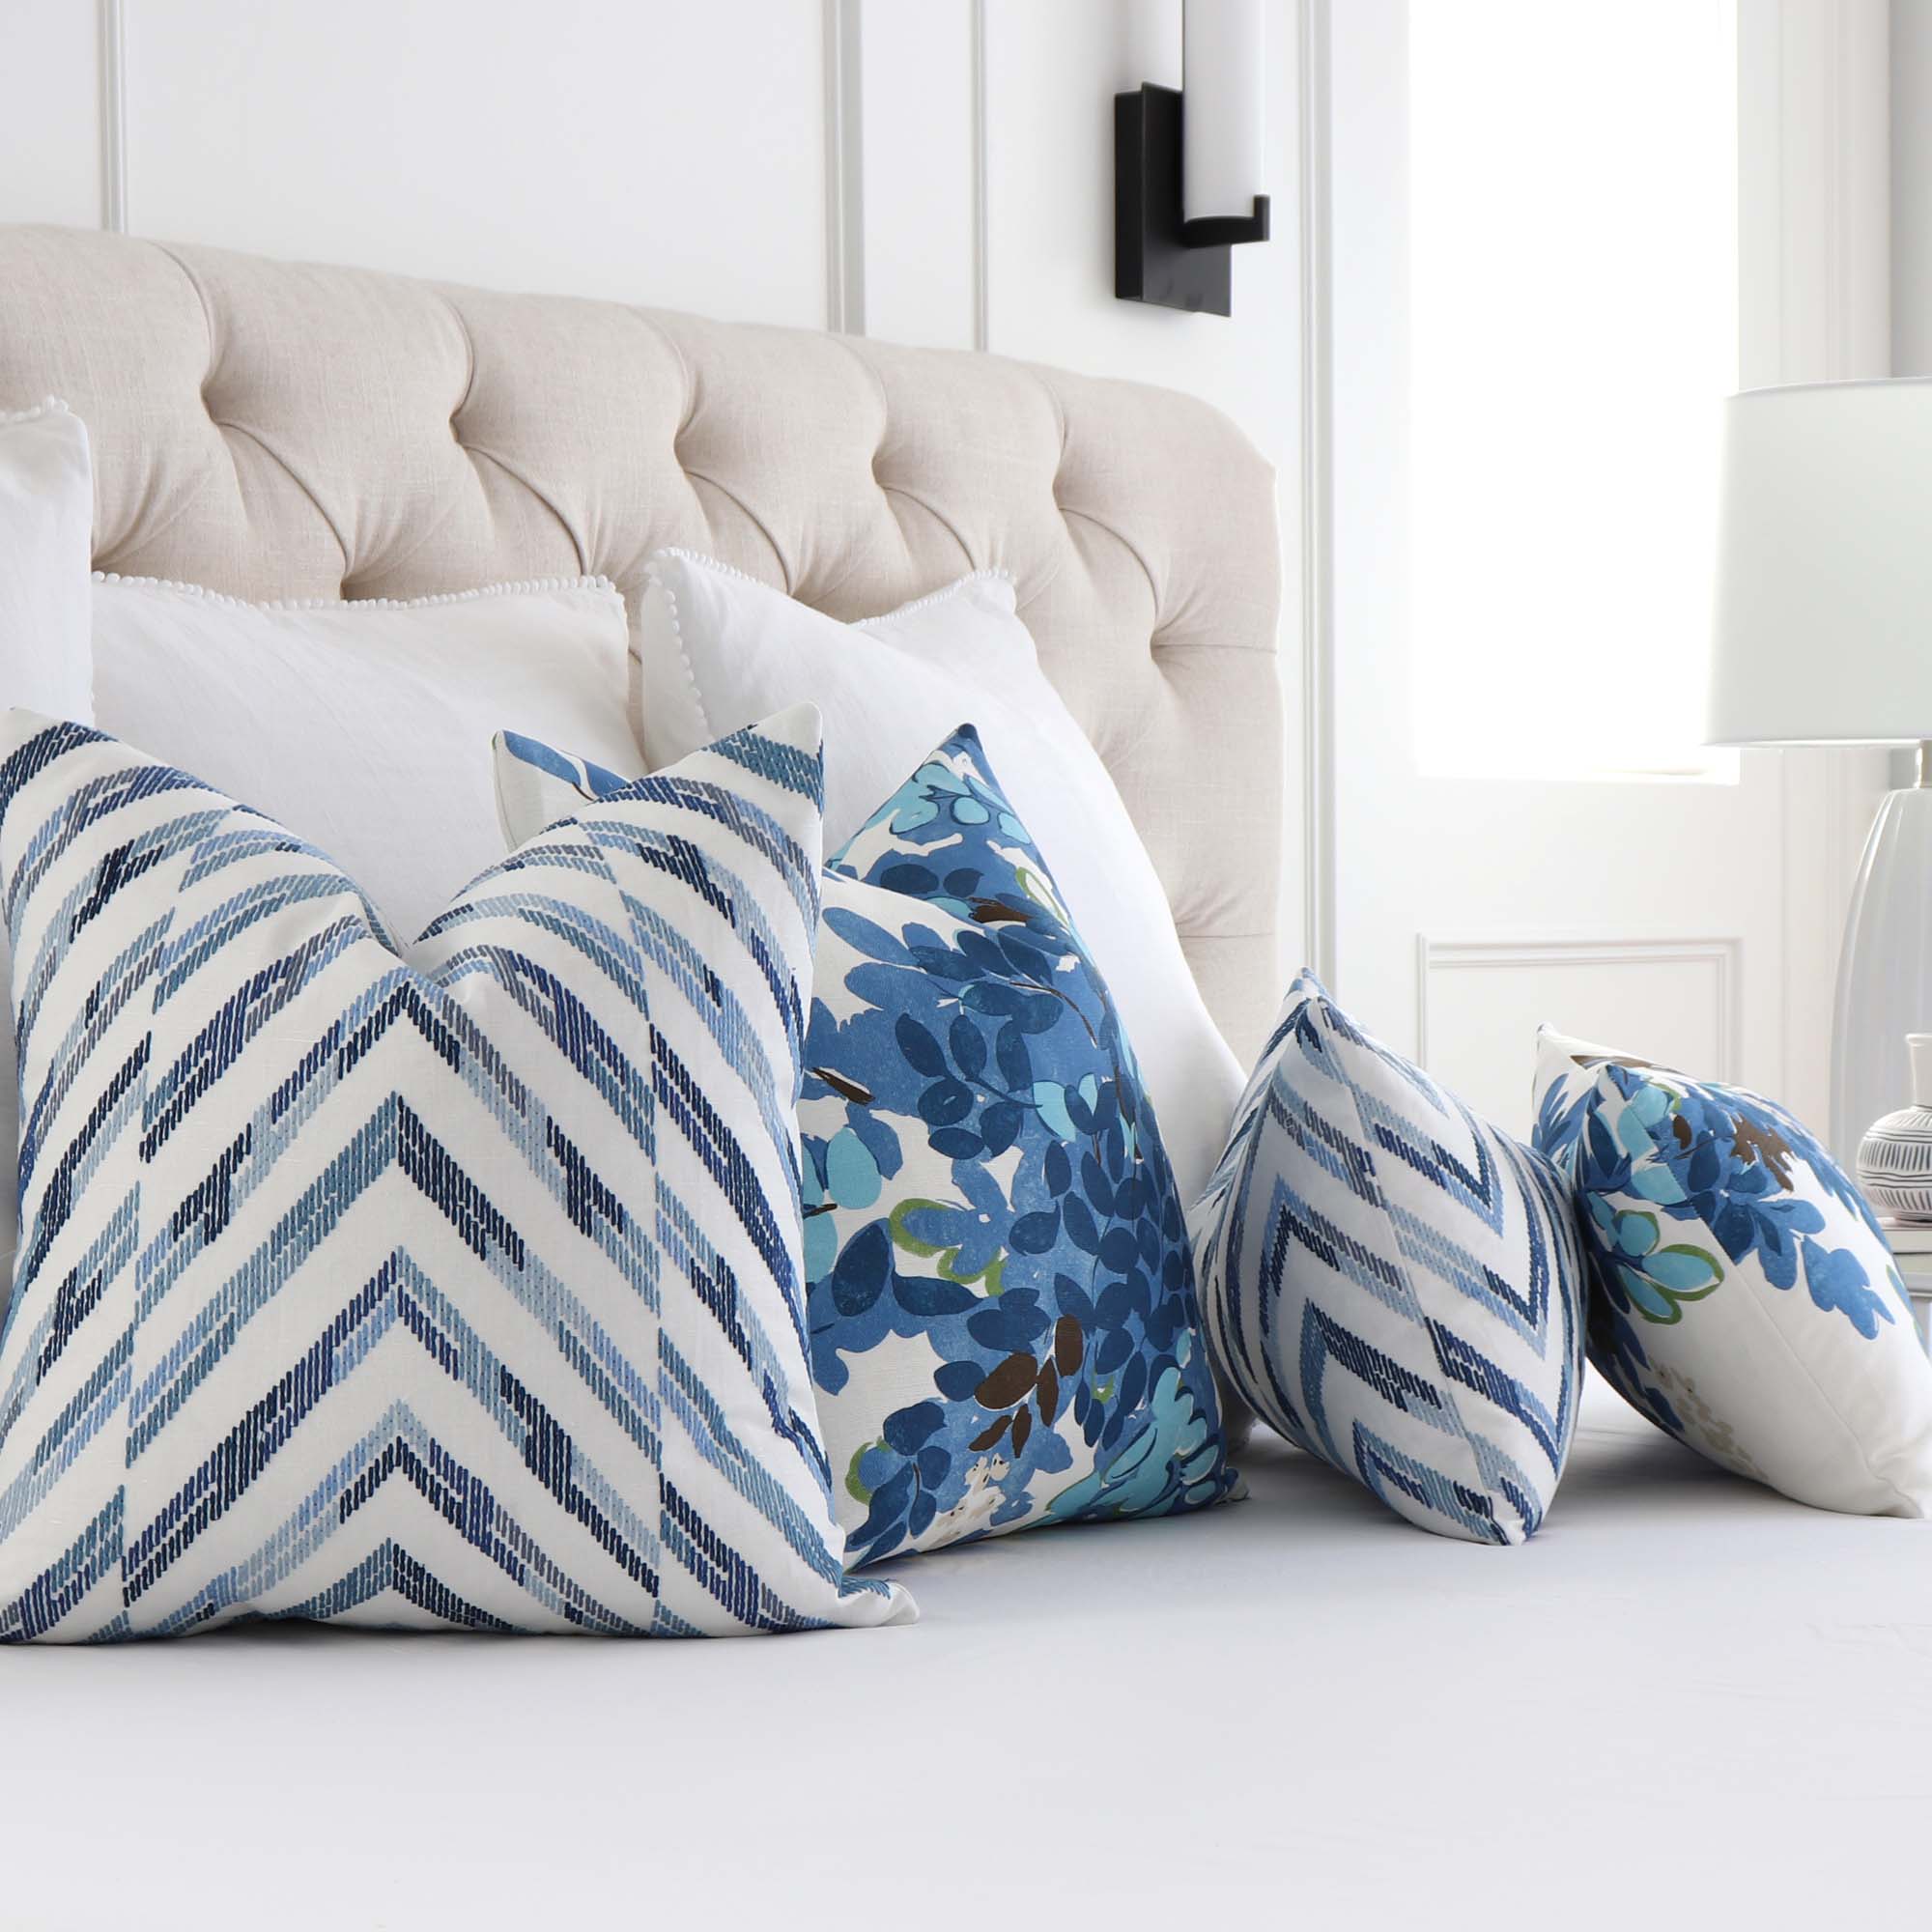 Thibaut Hamilton Embroidered Textured Blue and White Chevron Geometric Designer Luxury Throw Pillow Cover with Thibuat Central Park Pillows